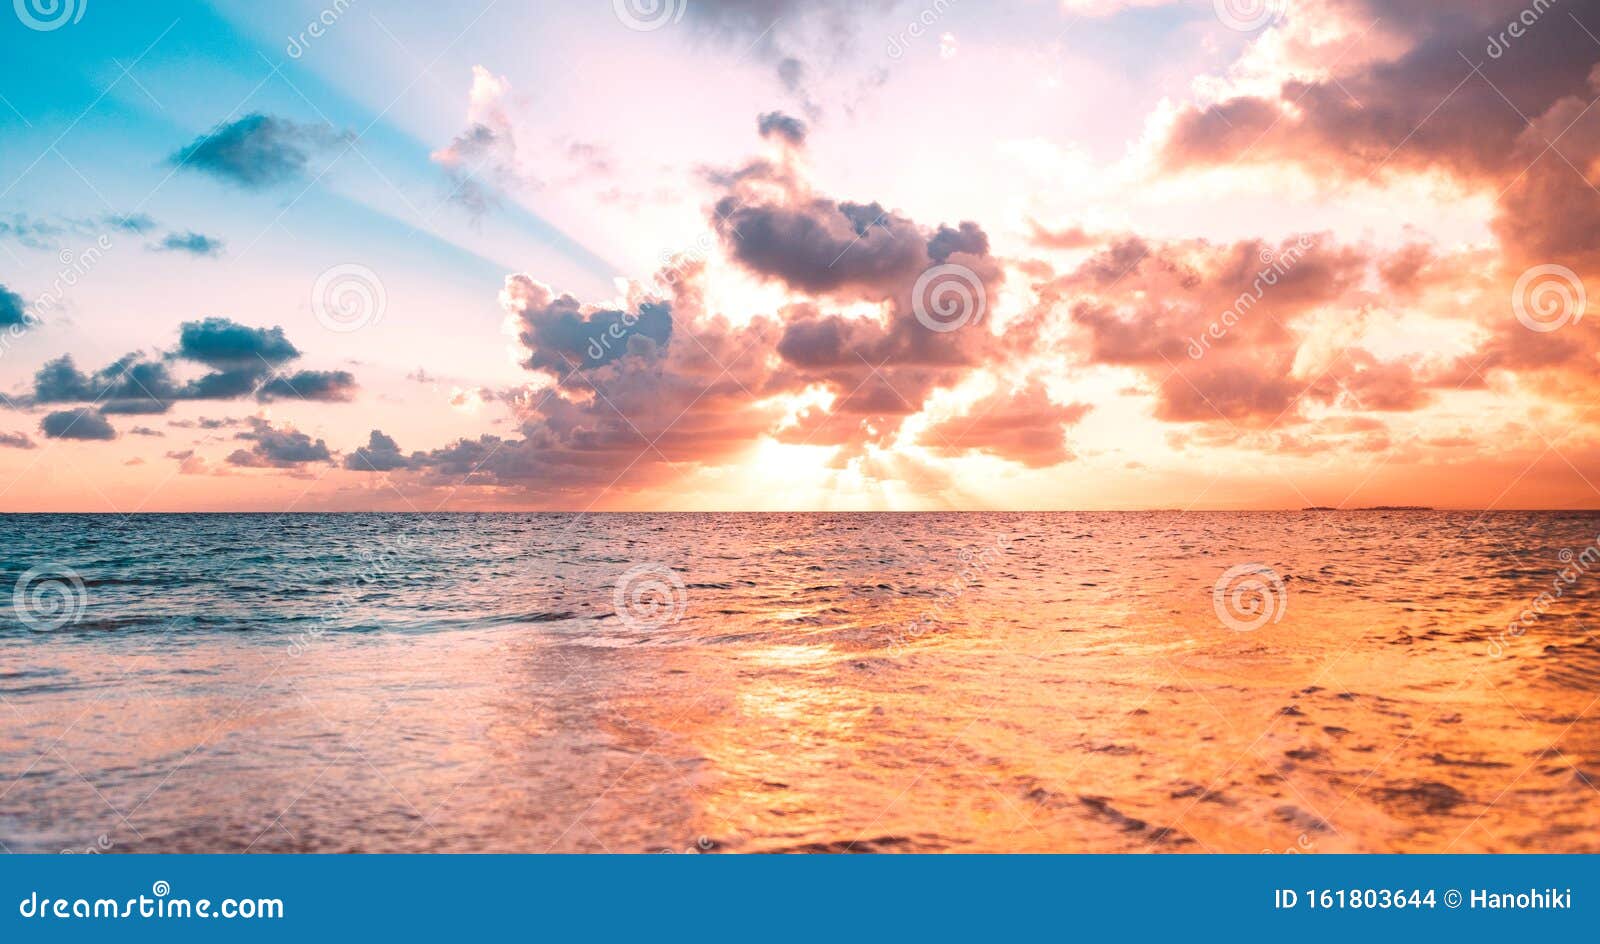 Ocean Sunset Sky Background with Colorful Cloud Stock Photo - Image of  peaceful, ocean: 161803644